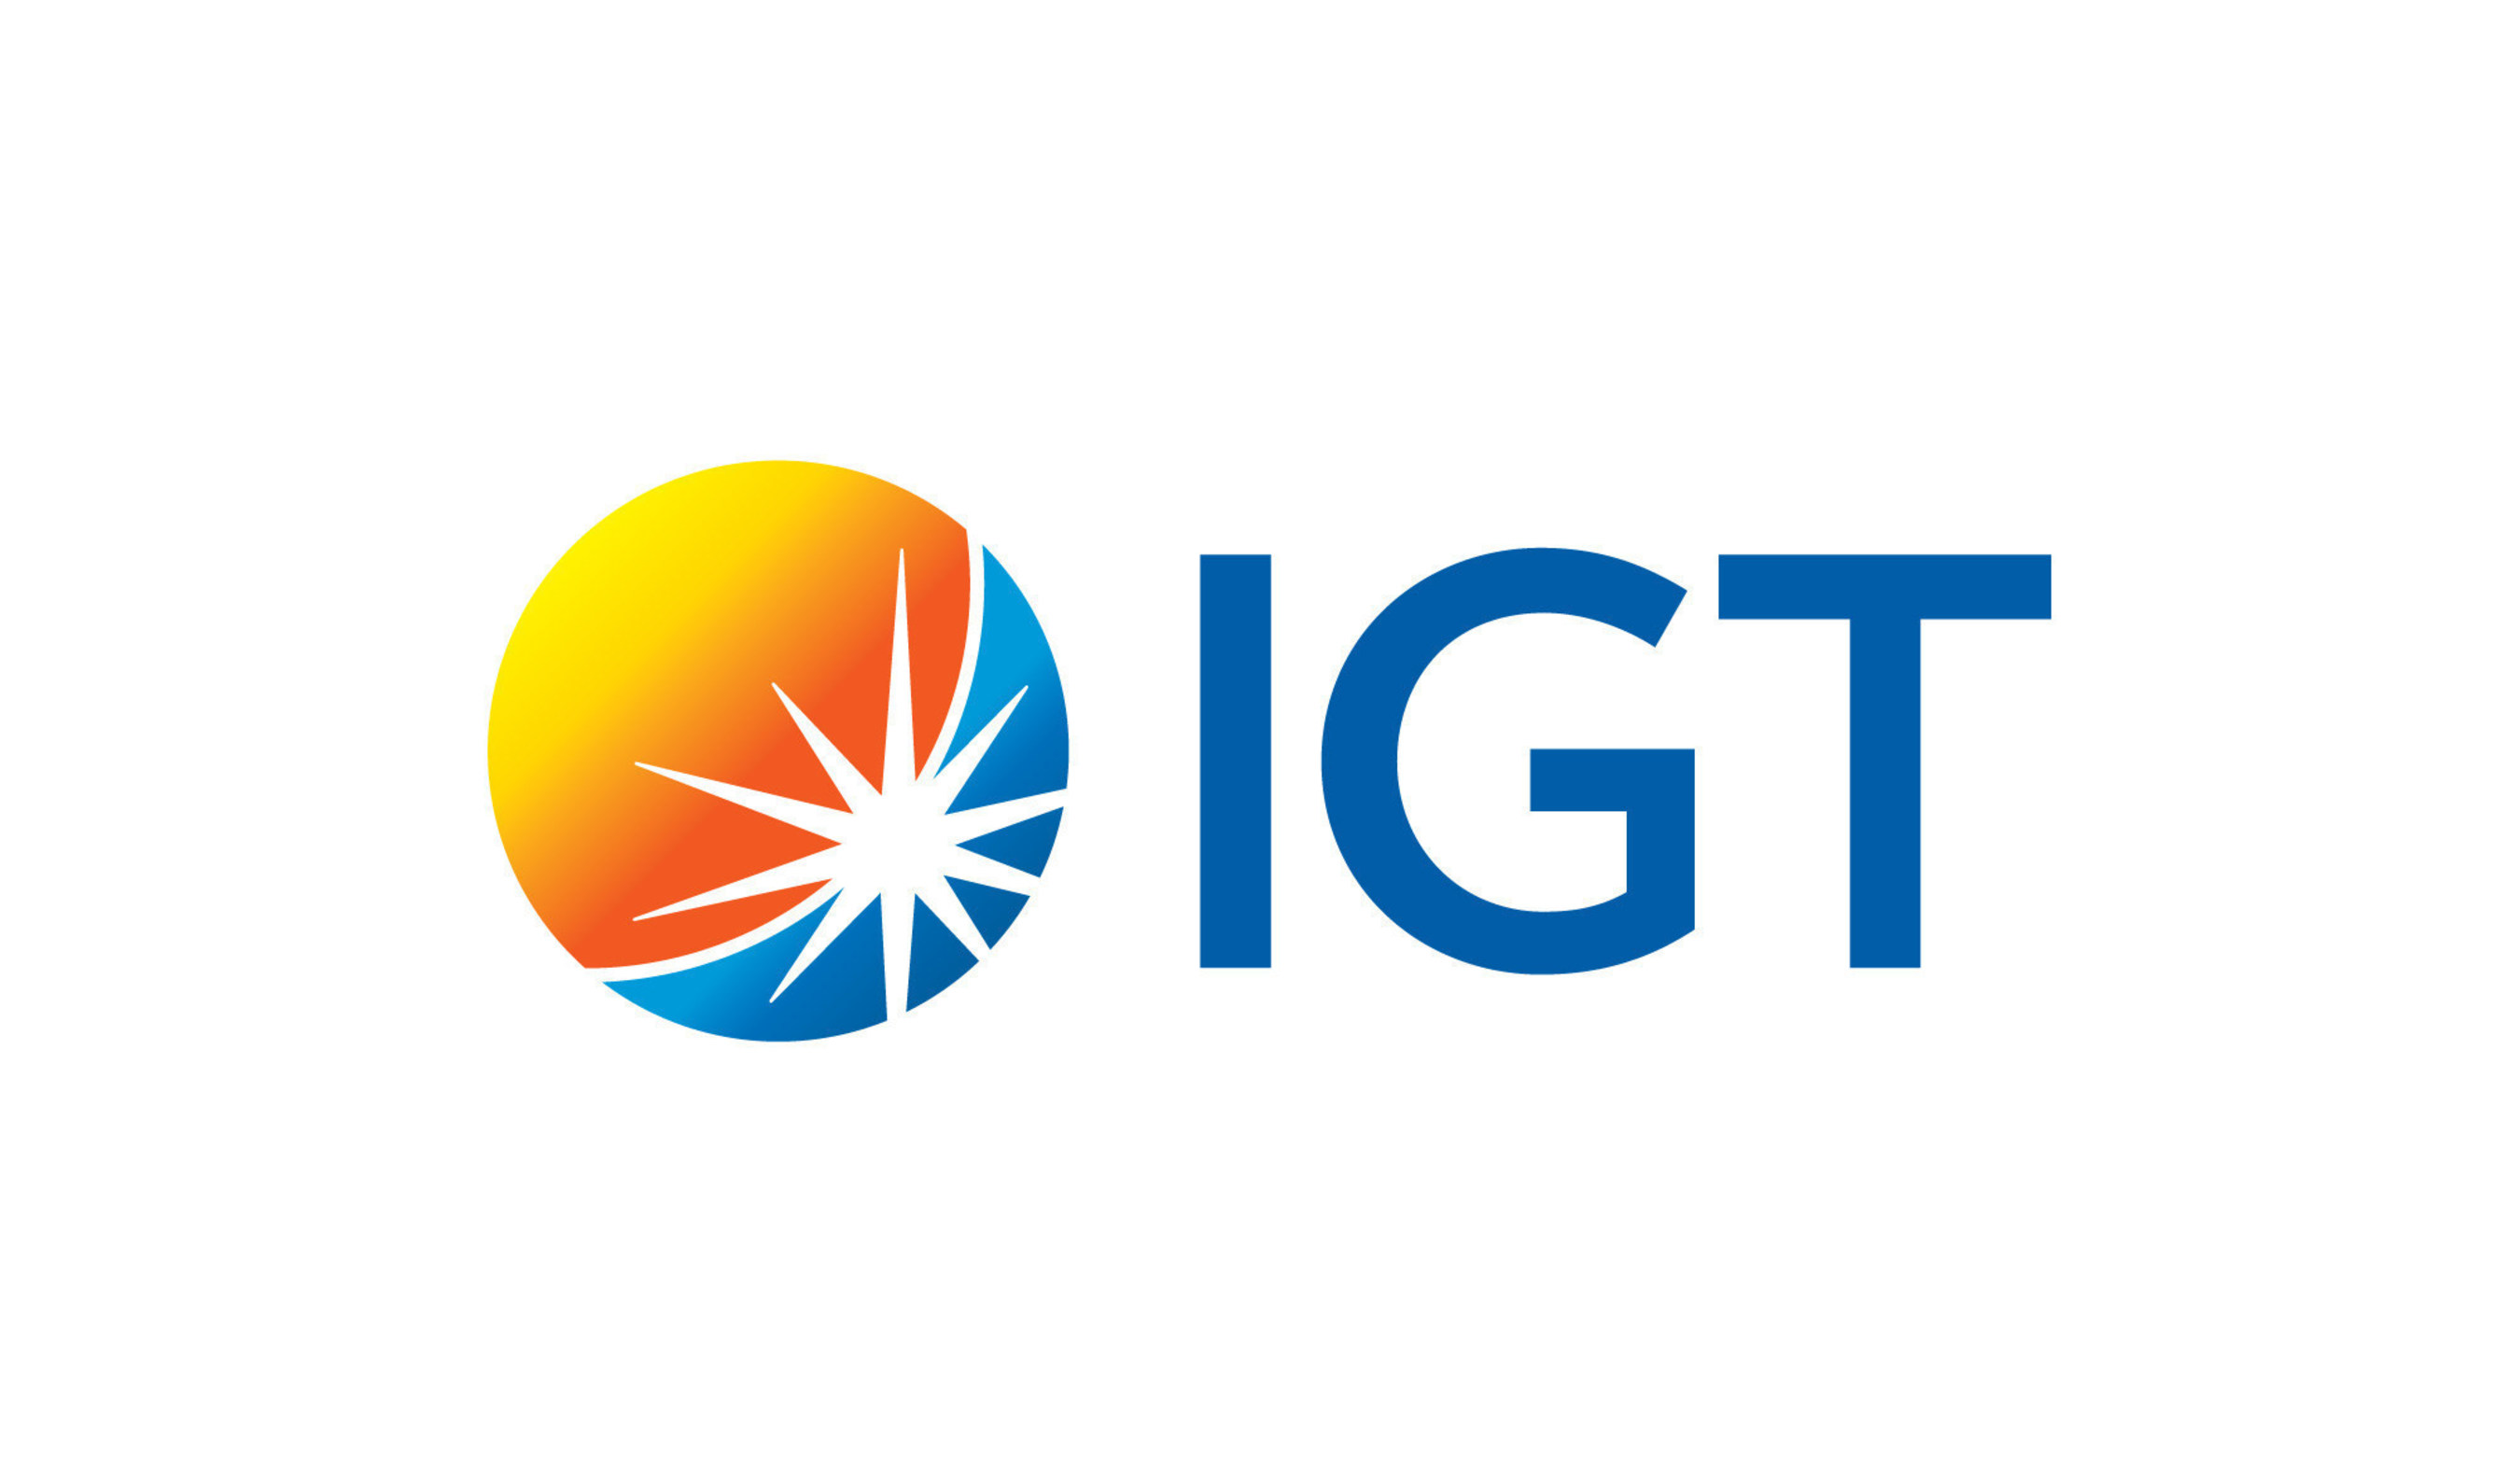 IGT (IGT) is the global leader in gaming. We enable players to experience their favorite games across all regulated segments and channels, from Gaming Machines and Lotteries to Interactive and Social Gaming. Leveraging a wealth of prime content, substantial investment in innovation, in-depth customer intelligence, operational expertise and leading-edge technology, our gaming solutions anticipate the demands of consumers wherever they decide to play. We have a well-established local presence and relationships with governments and regulators in more than 100 countries around the world, and create value by adhering to the highest standards of service, integrity, and responsibility. IGT has approximately $6 billion in revenues and more than 13,000 employees. For more information, please visit www.igt.com/merger.